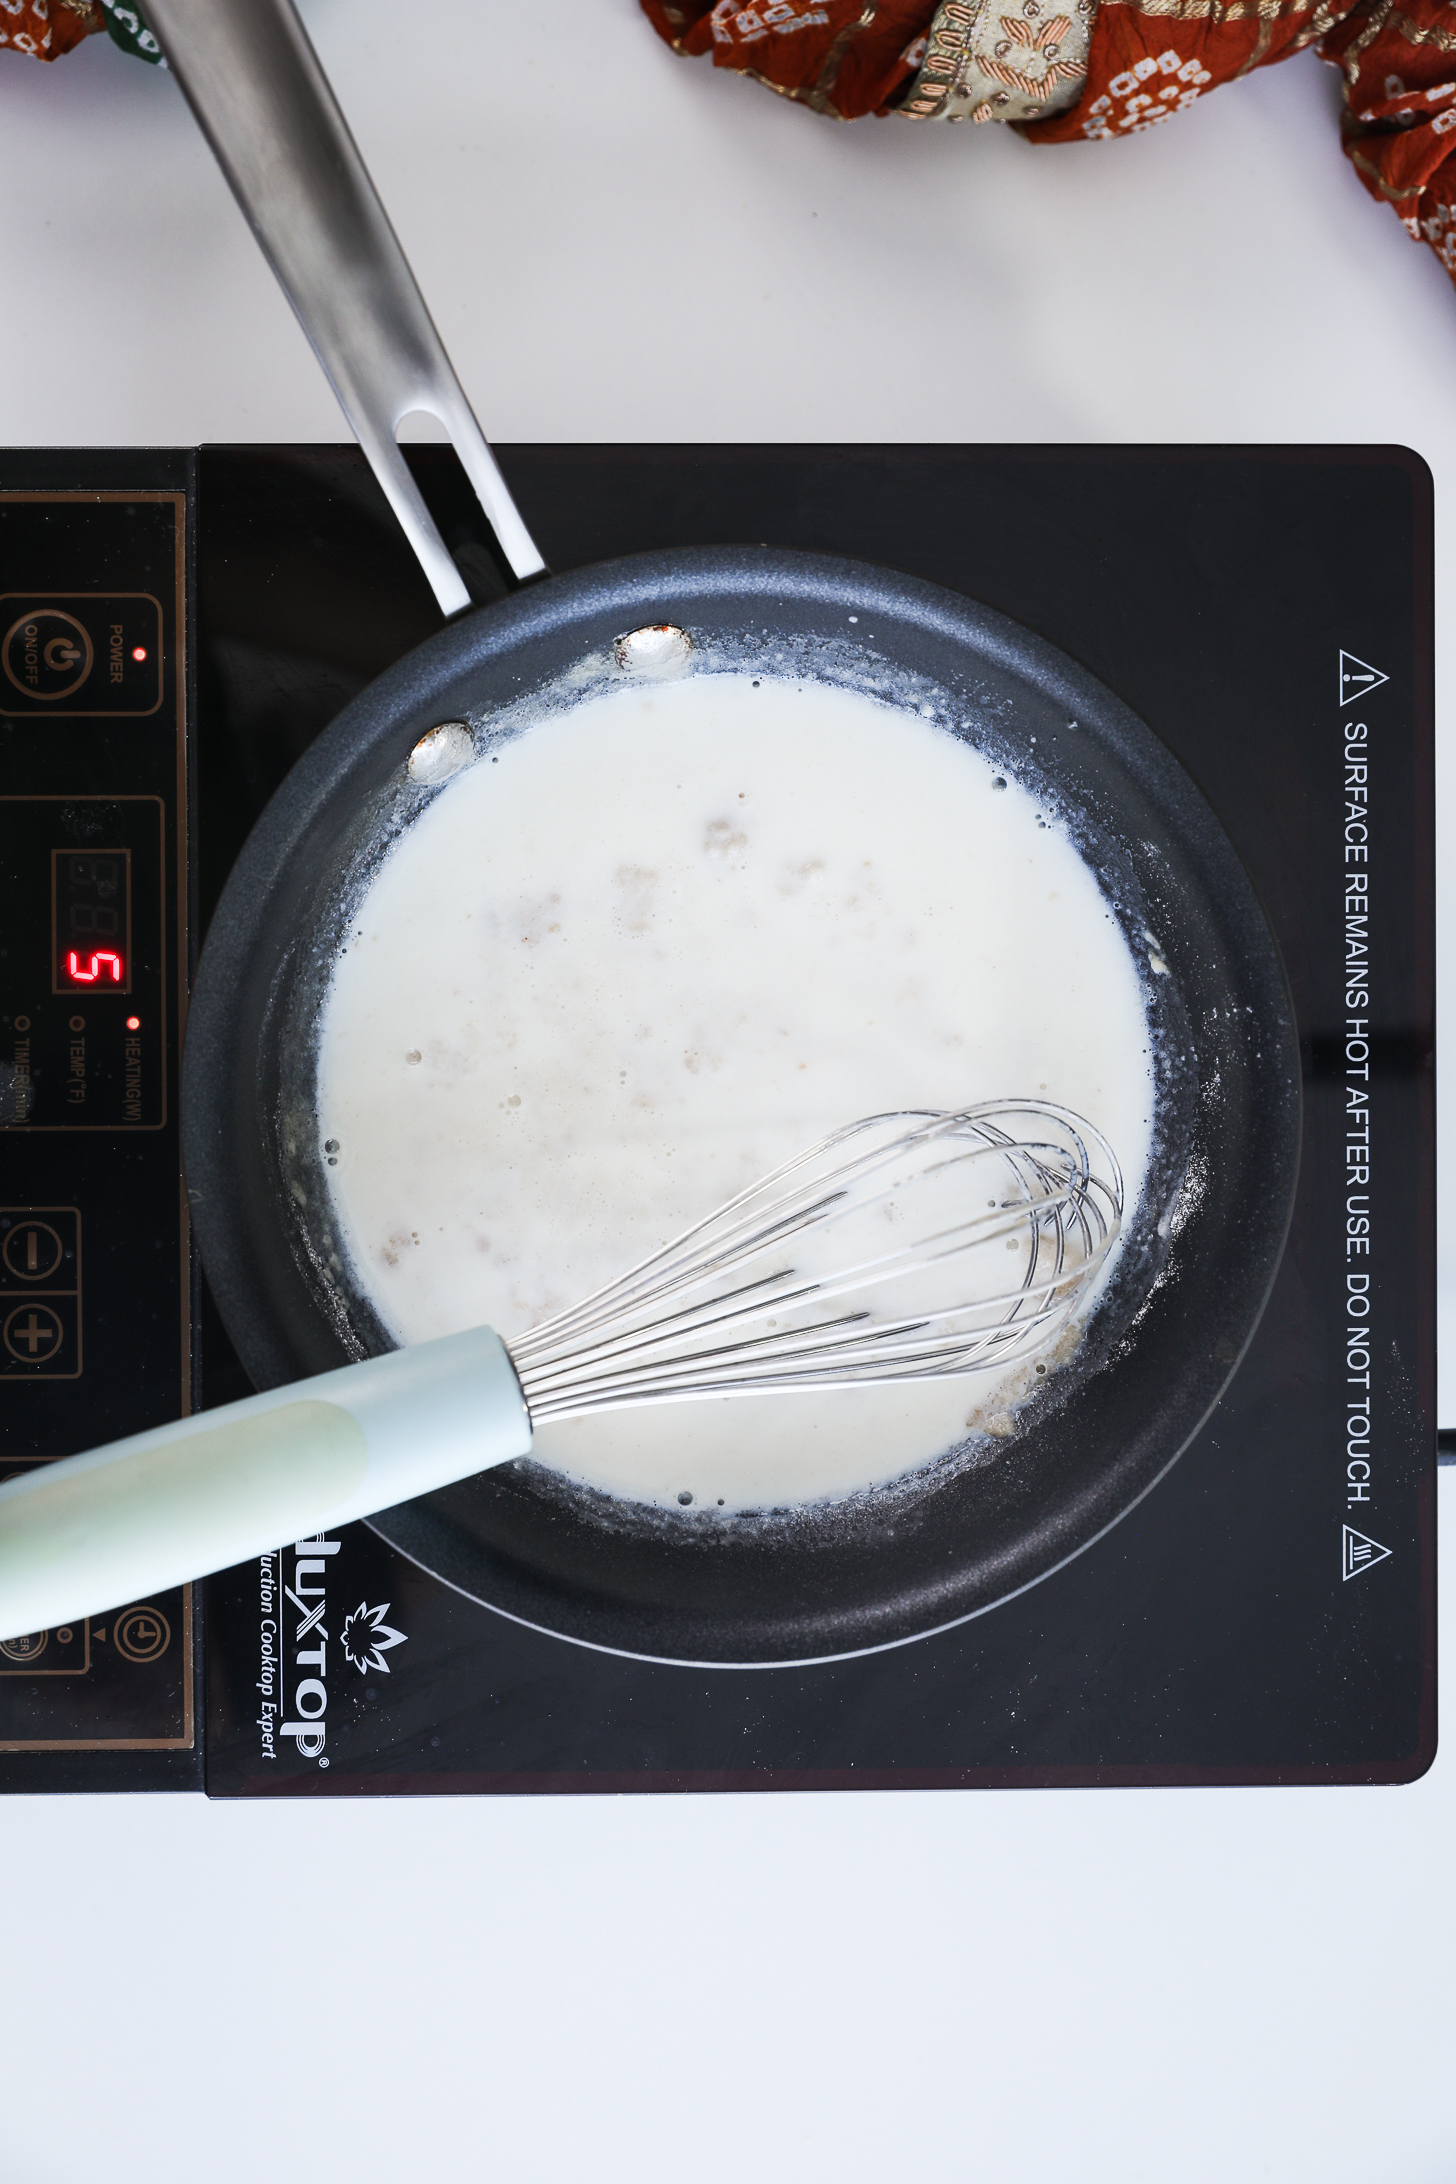 A pan filled flour and milk (making roux), featuring a whisk resting inside it, placed on a mobile cooktop.